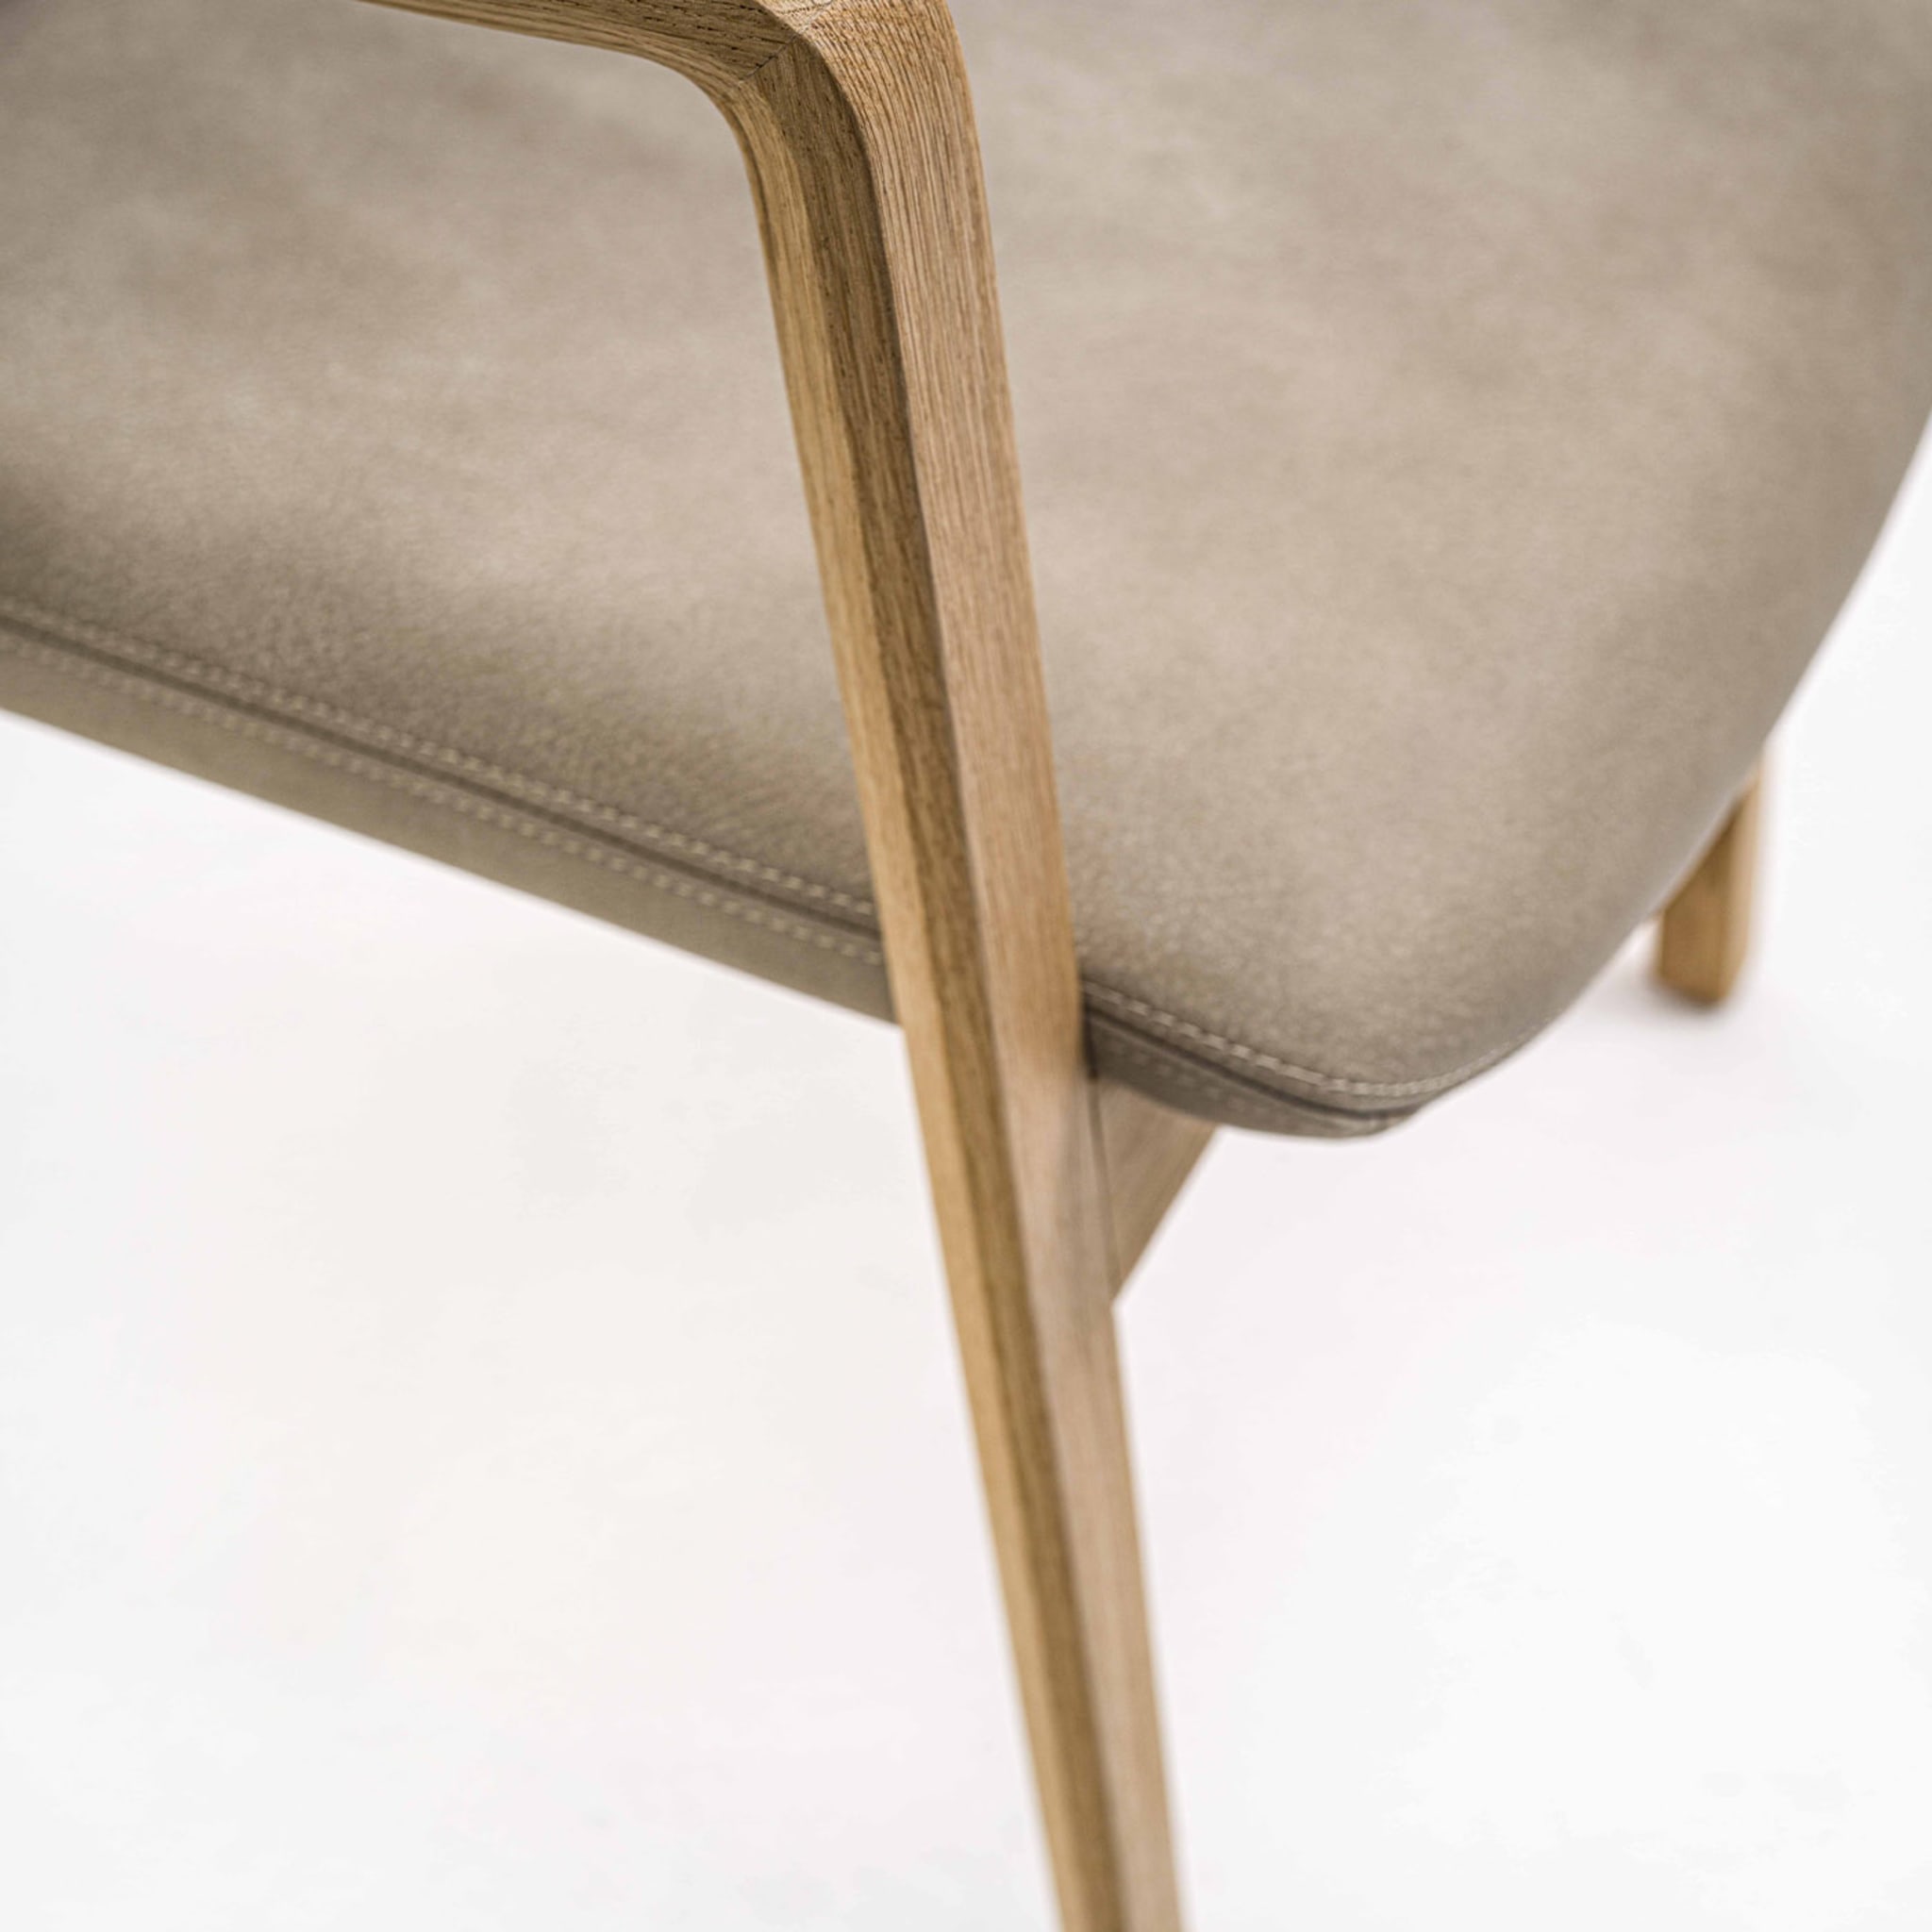 Noblé Brown Chair With Arms by Giuliano & Gabriele Cappelletti - Alternative view 1